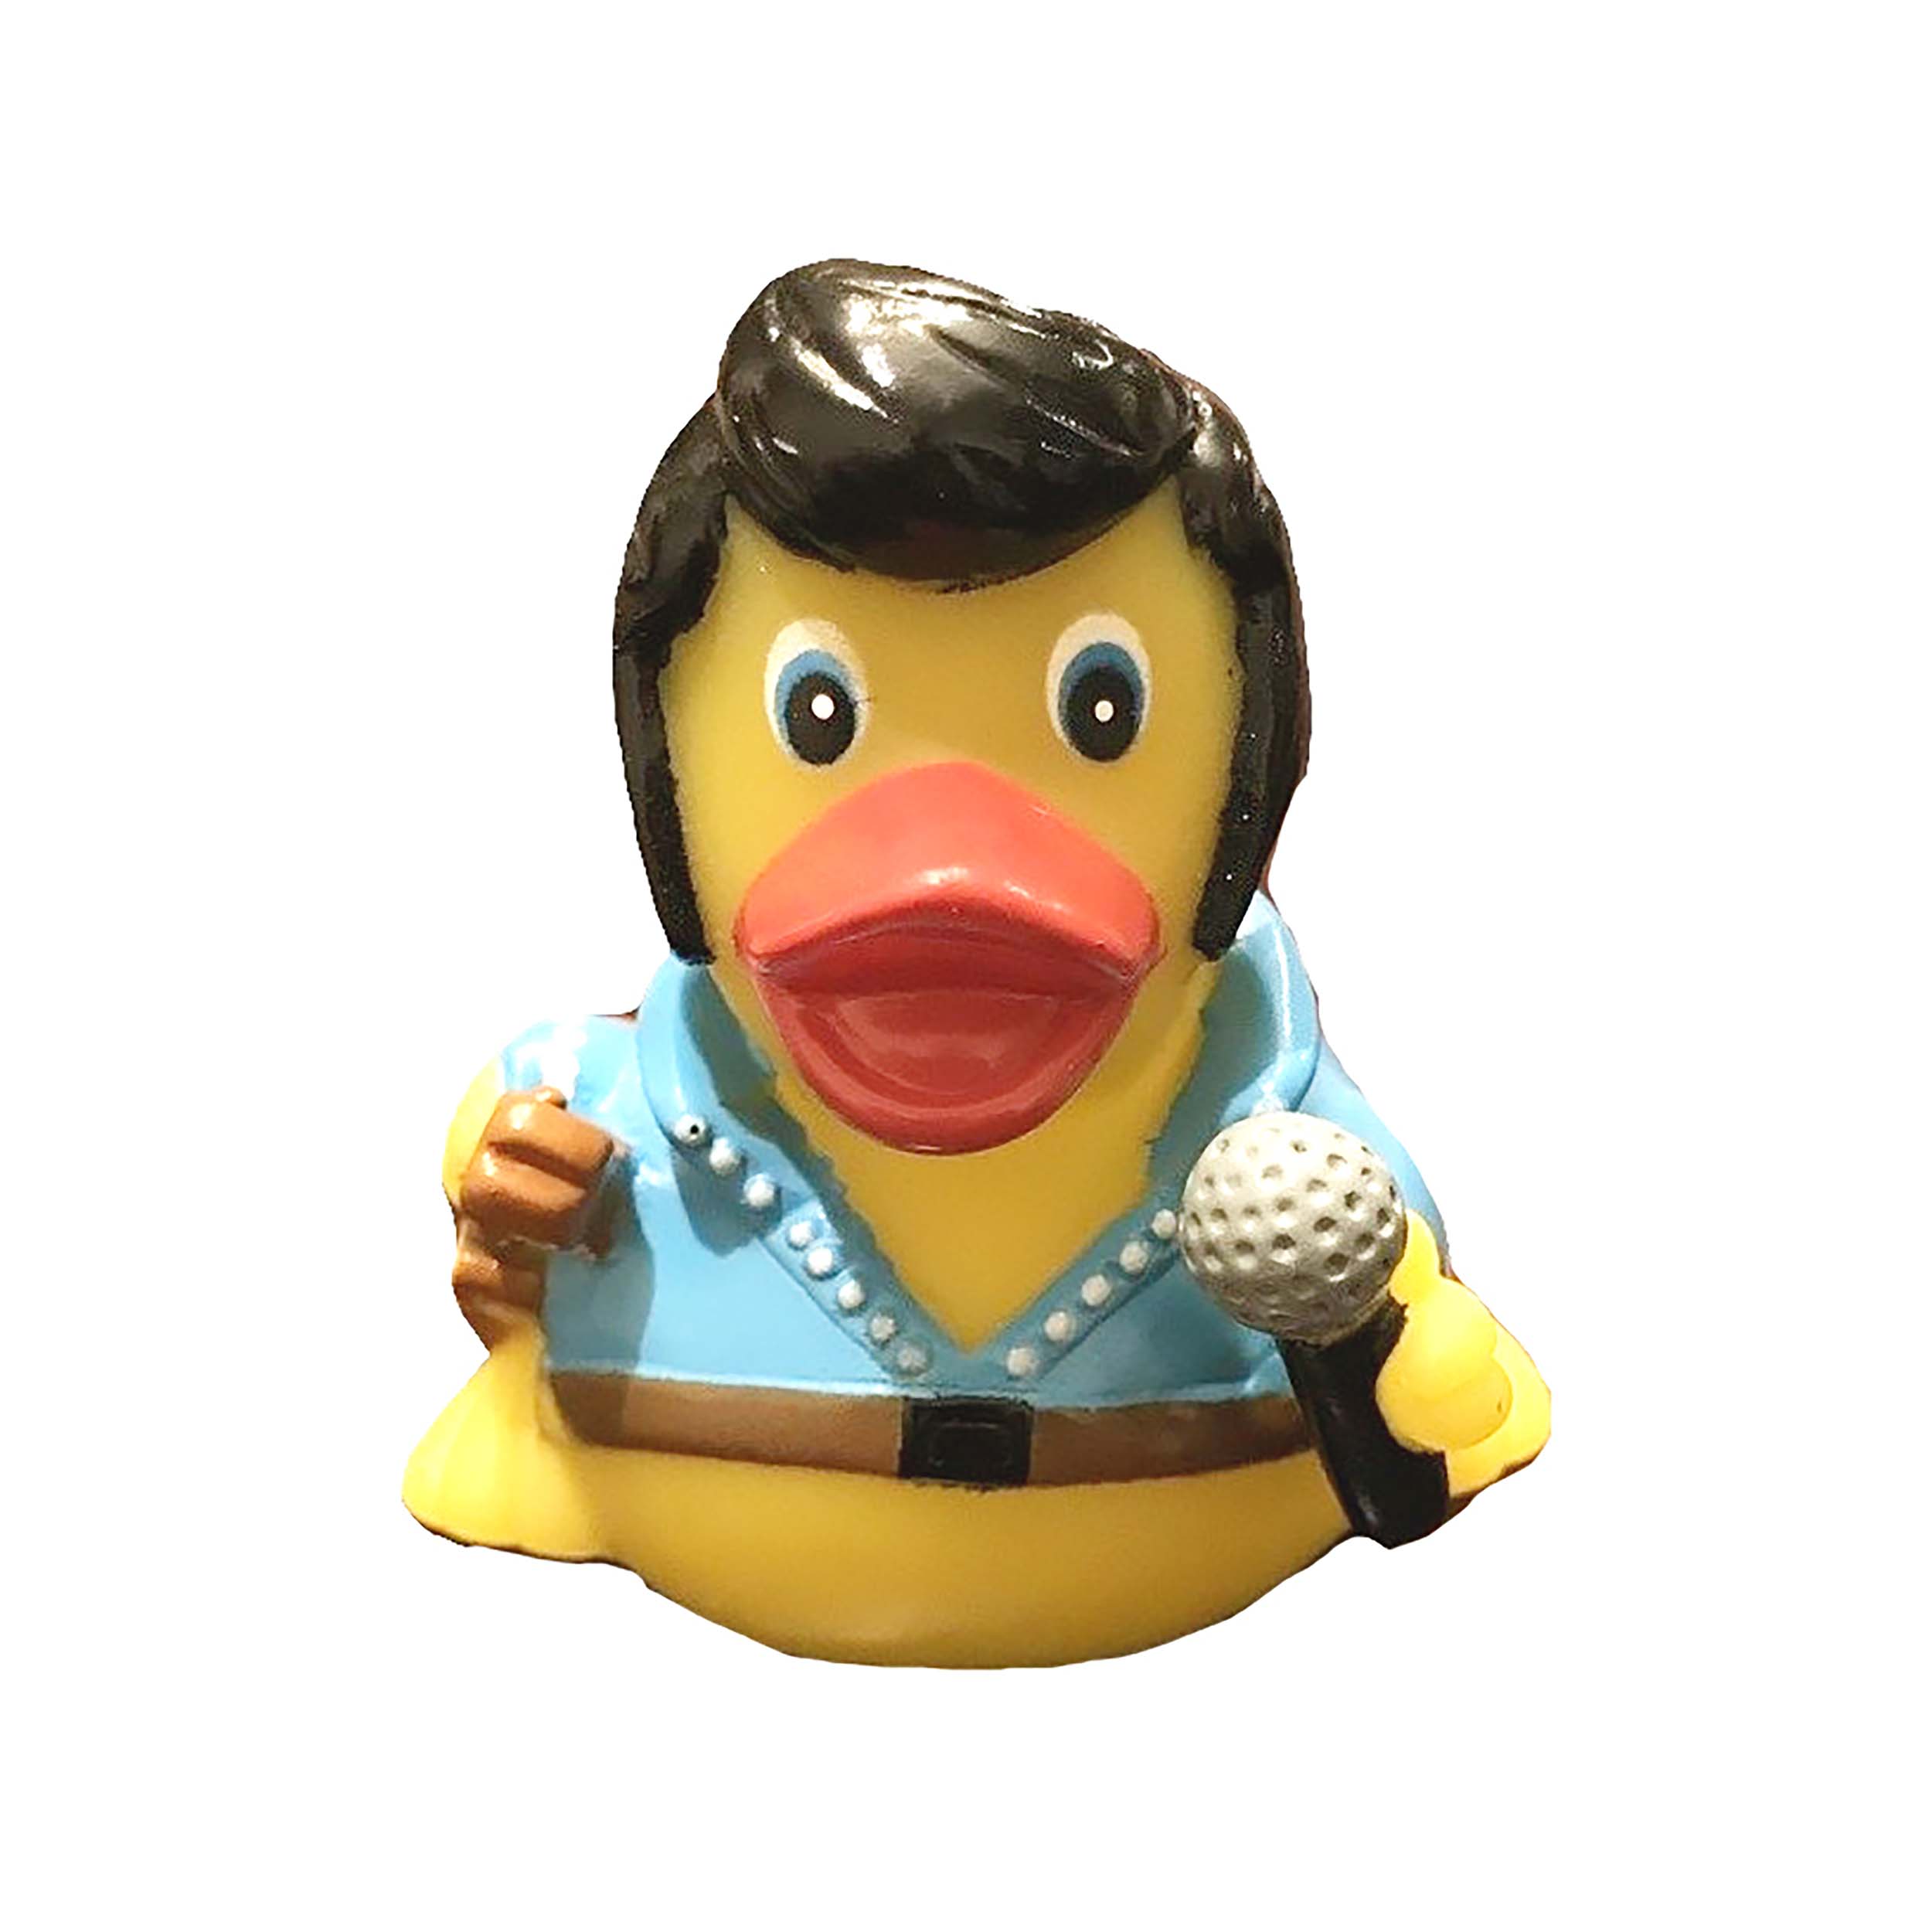 Rubber Elvis Duck- Personalized Rubber Ducks For Sale For $4.50 Only – DUCKY  CITY